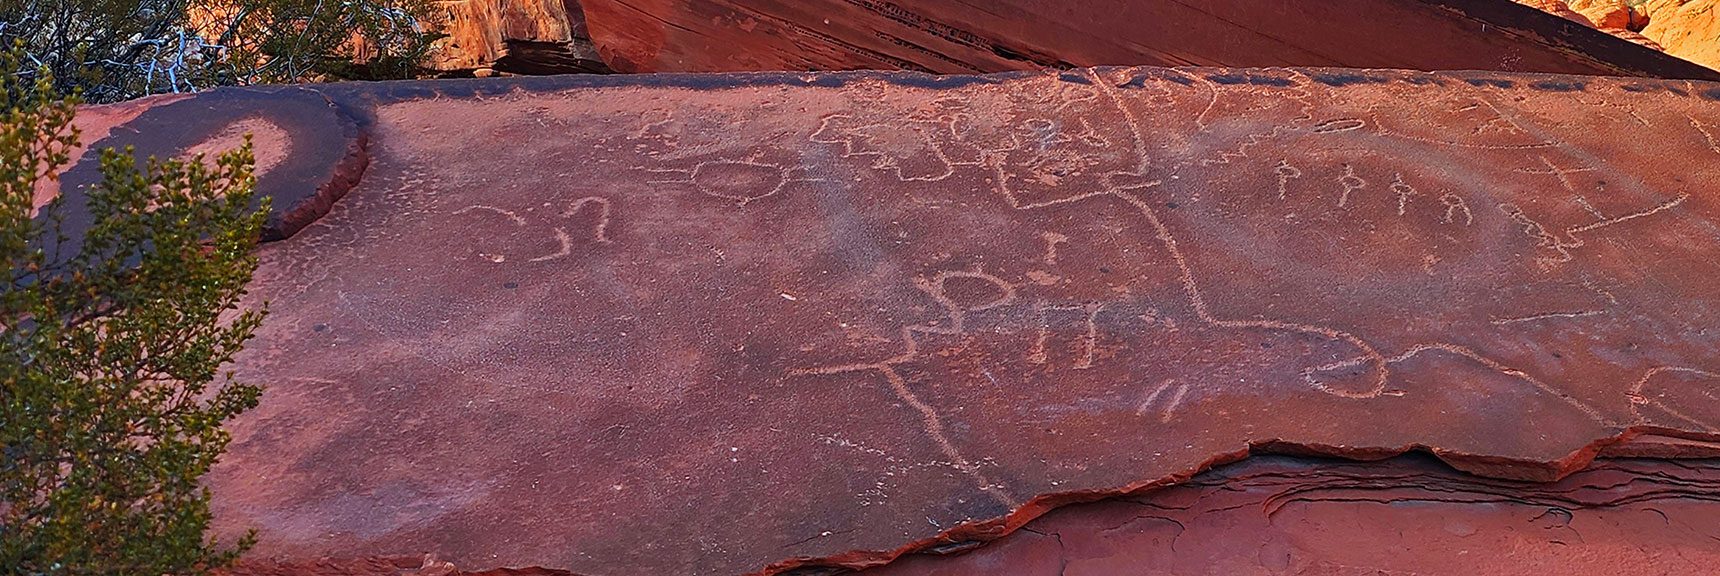 Ancient Paiute Native Americans Authored These Petroglyphs | Upper Calico Hills Loop | Calico Basin and Red Rock Canyon, Nevada